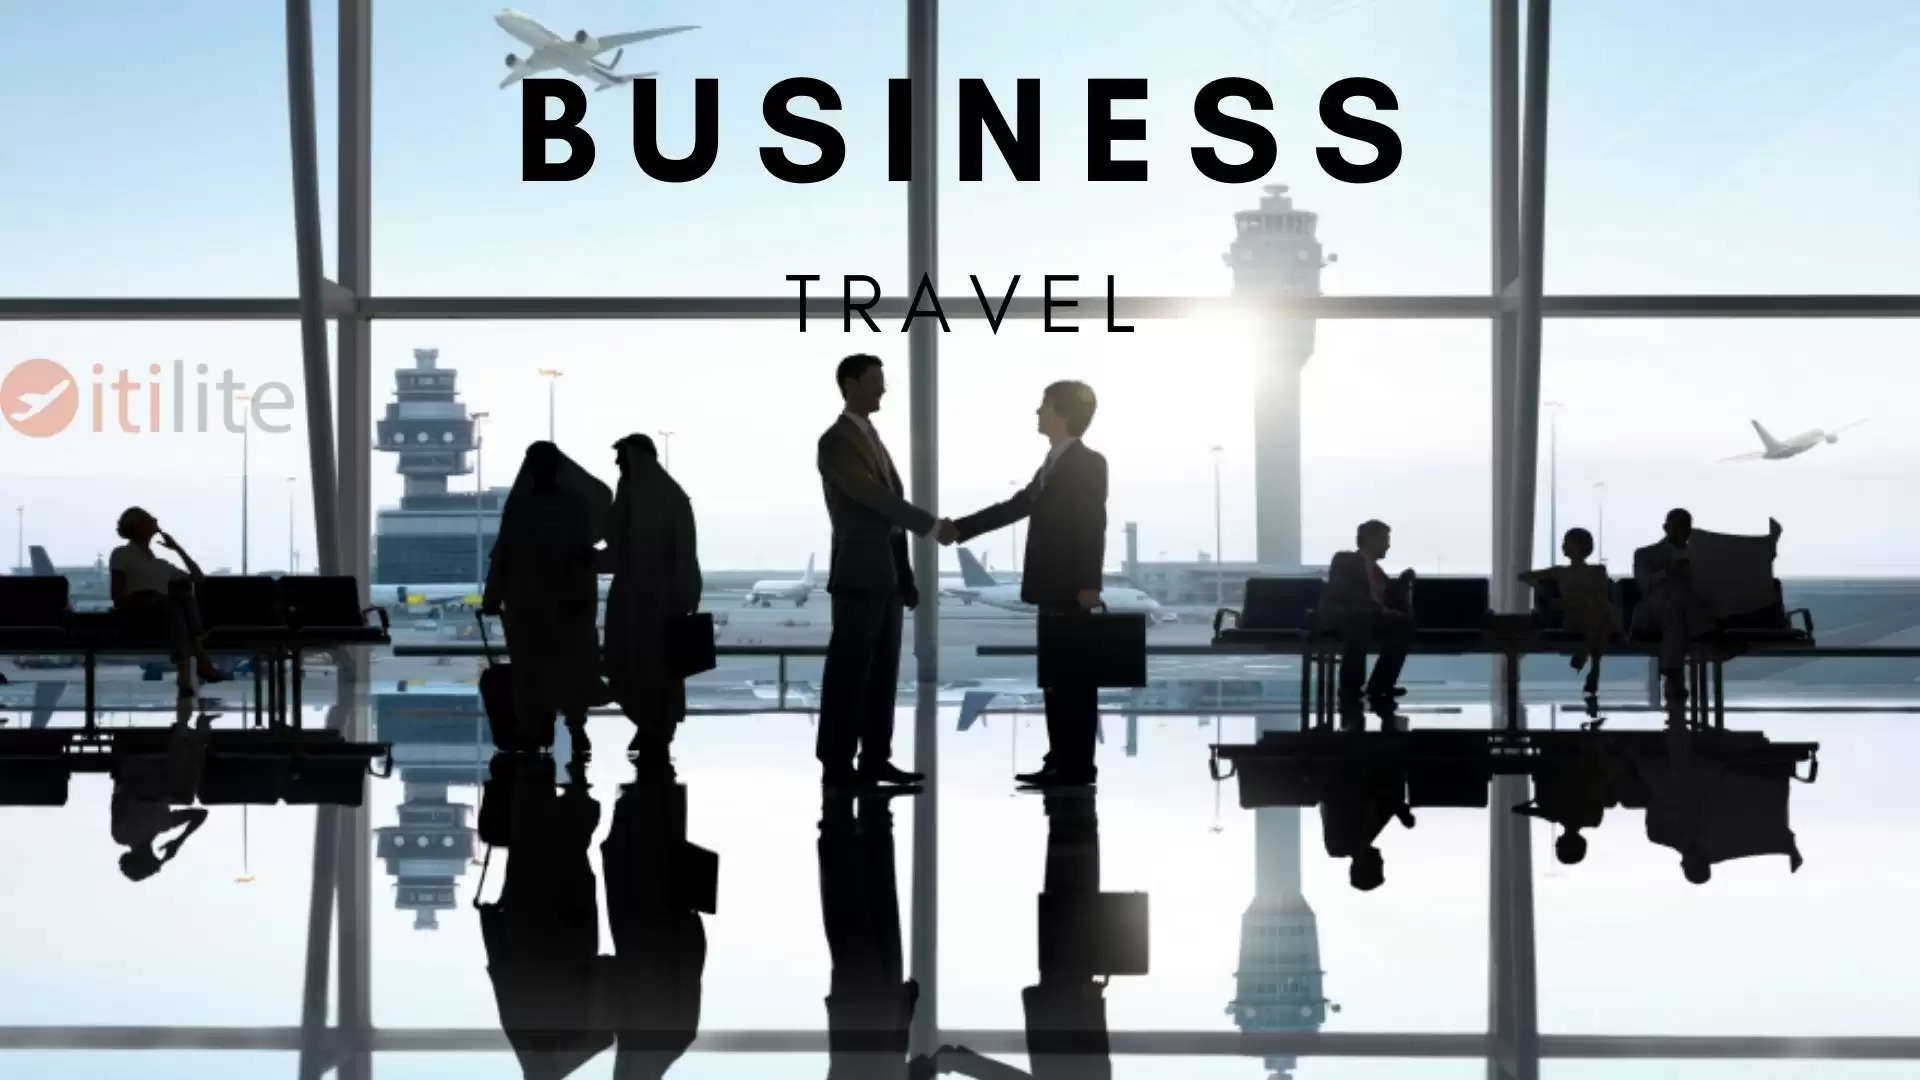 Business Travel is back with a bang Data suggests that post pandemic business travel will resume as usual